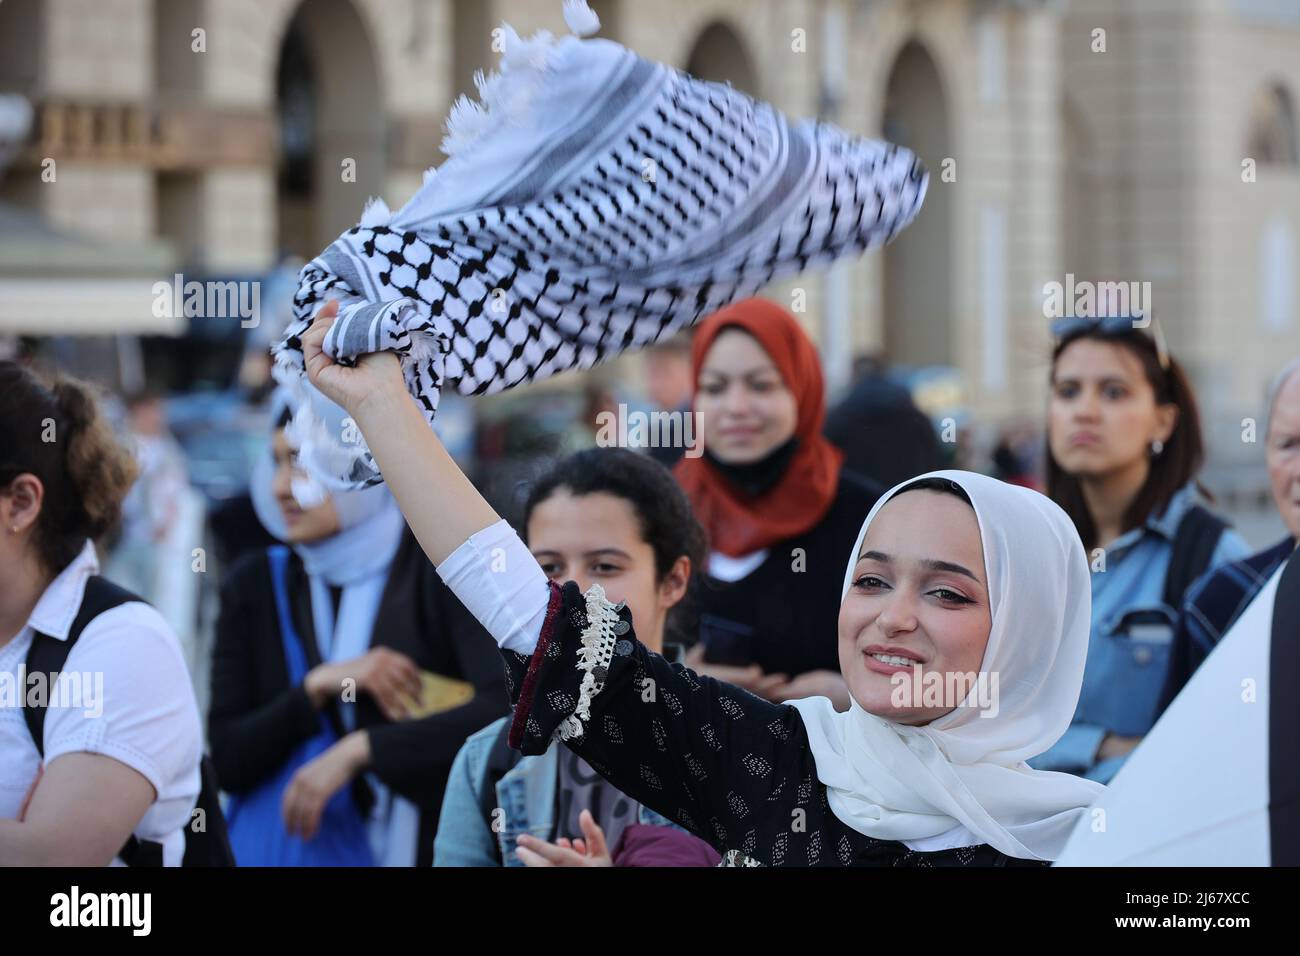 Turin, Italy. 28th April, 2022. A woman waves her keffiyeh at a protest against the raids of Israeli forces in West Bank and restrictions on access to holy sites in Jerusalem during the Ramadan time. Credit: MLBARIONA/Alamy Live News Stock Photo